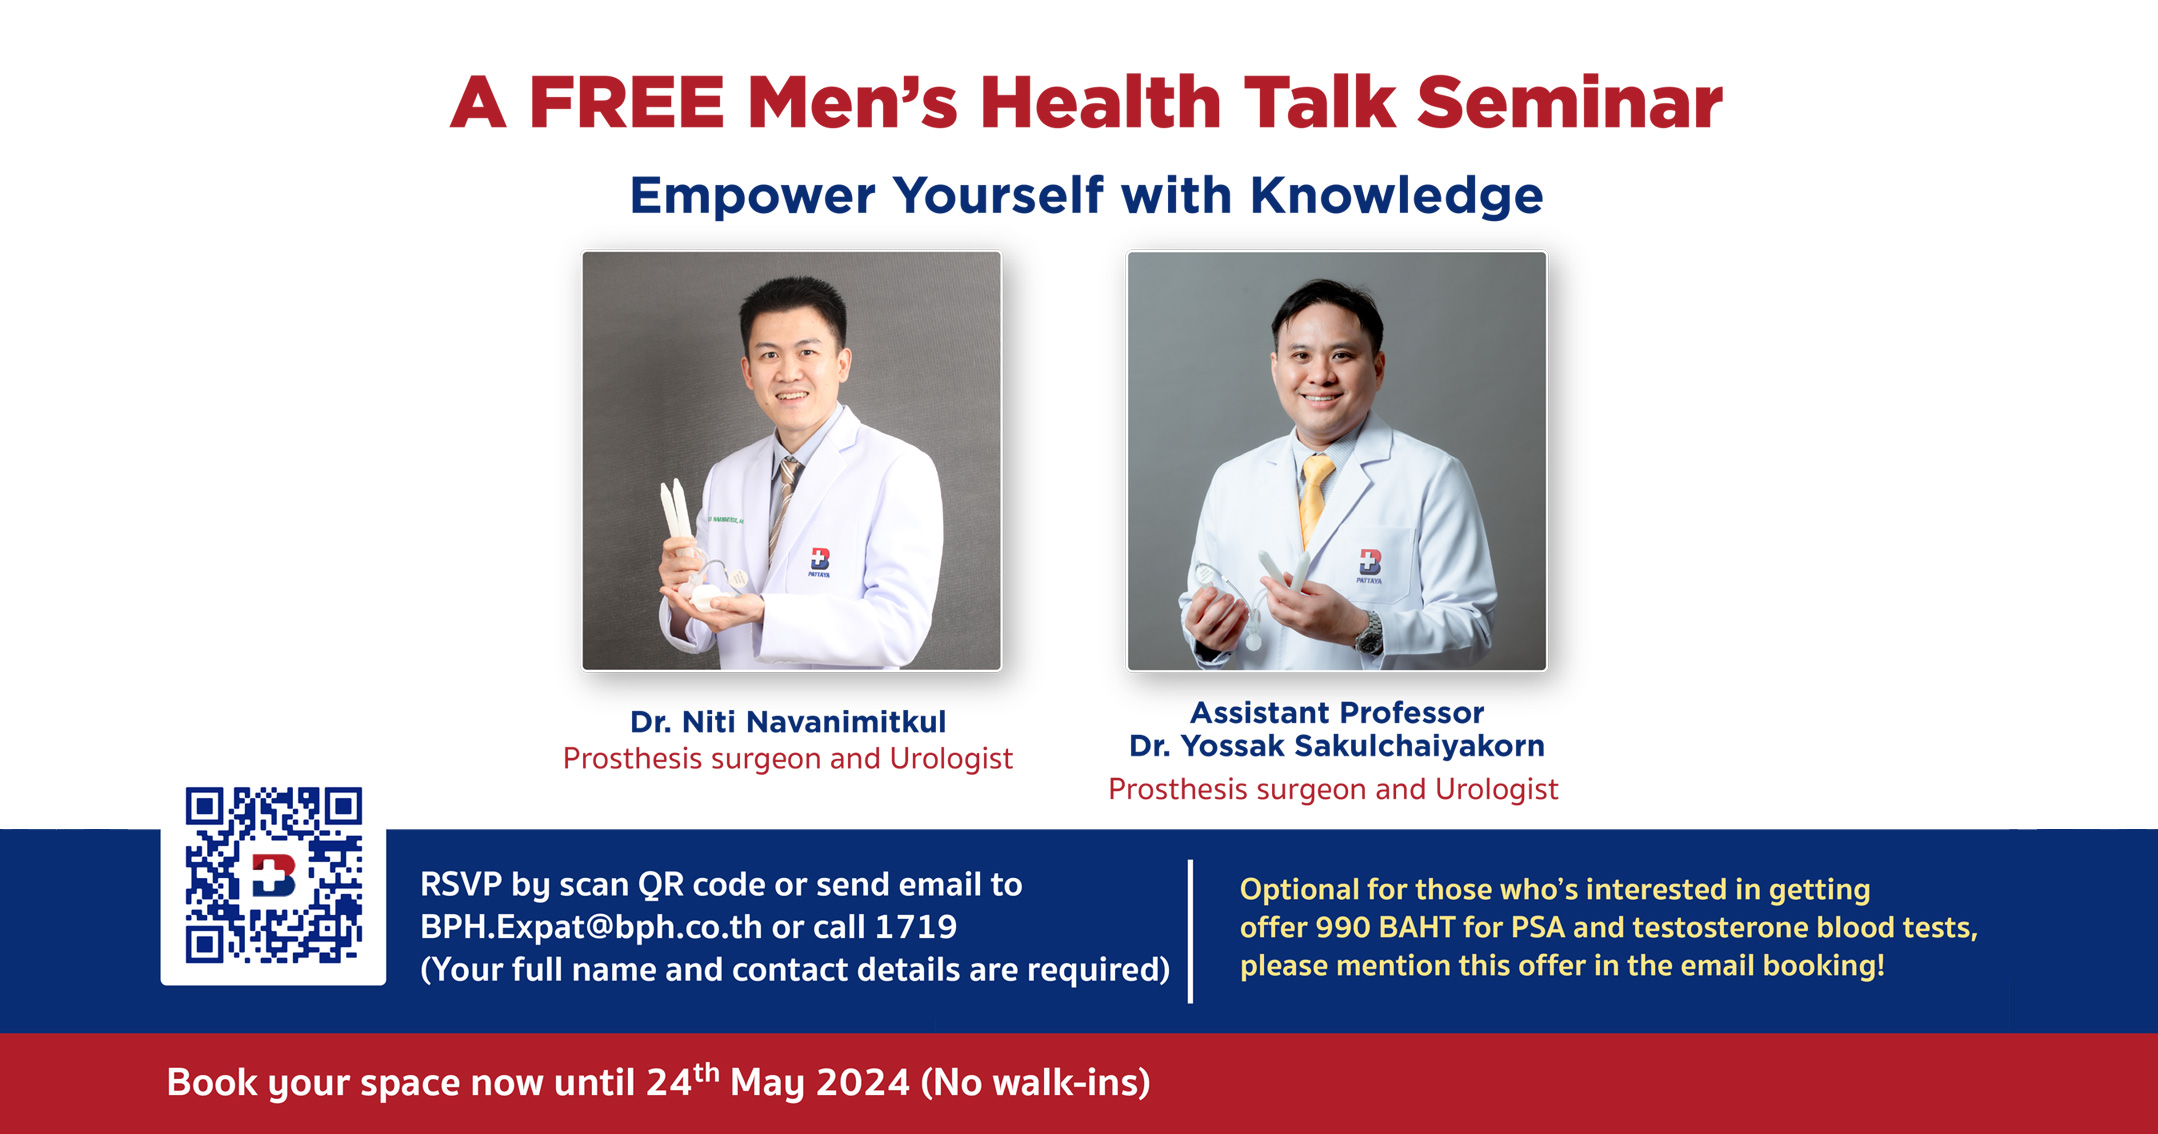 A FREE Men’s Health Talk Seminar. <br>Empower Yourself with Knowledge!